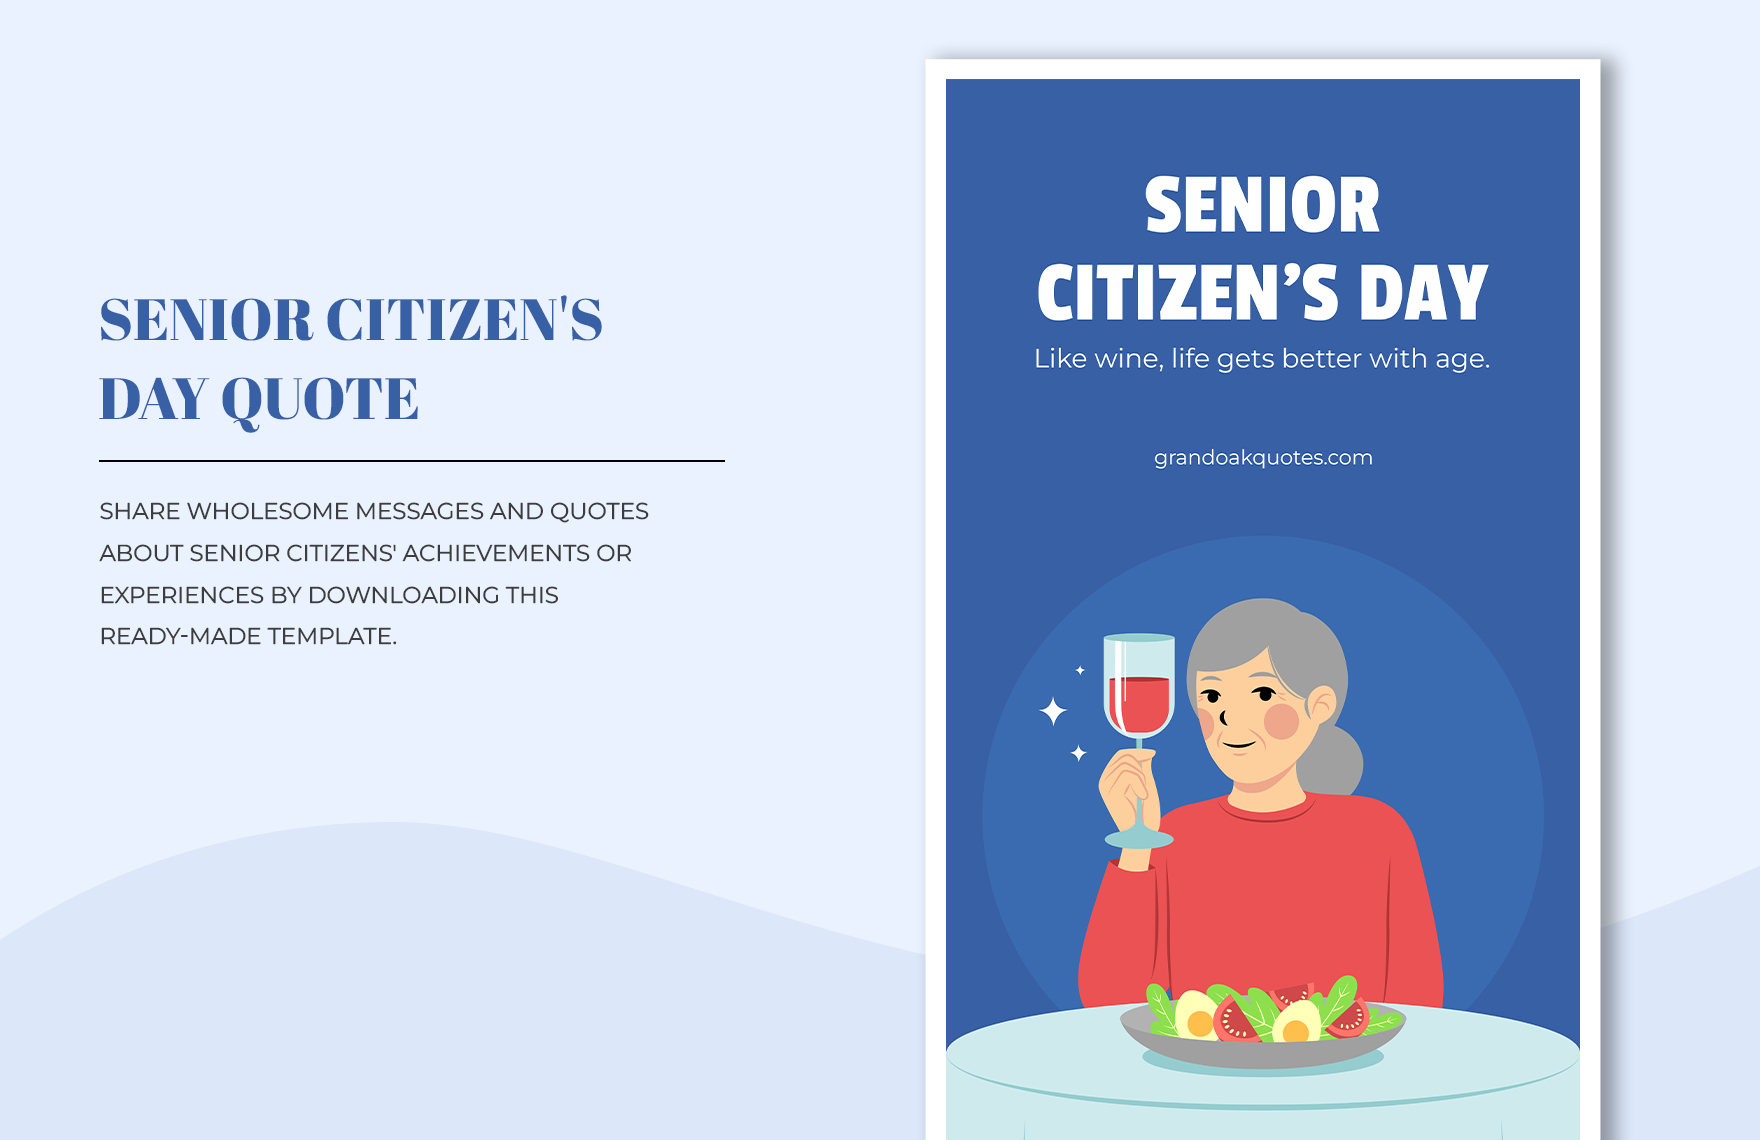 Senior Citizen's Day Quote in Illustrator, PNG, SVG, PDF - Download ...